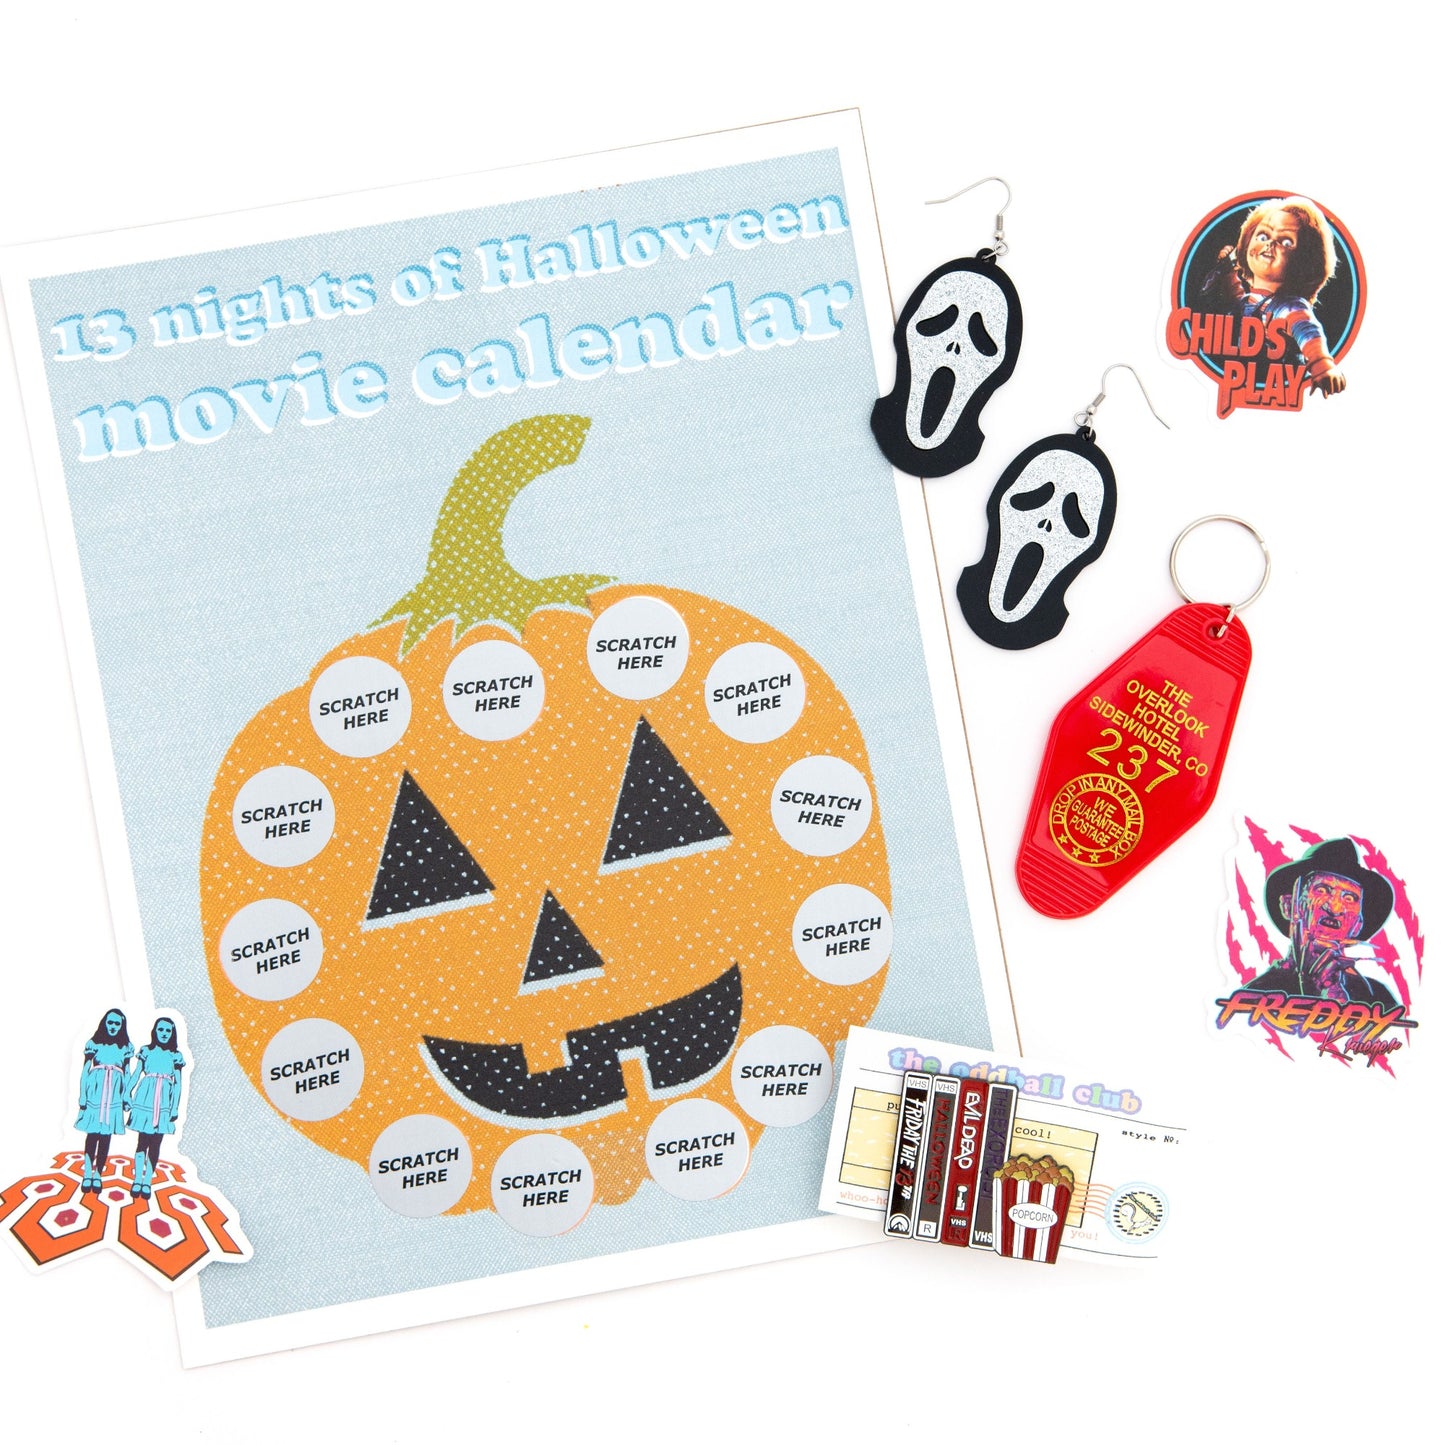 Get into the spooky spirit with our Halloween subscription box! Featuring horror stickers, a VHS scary movie enamel pin, scream earrings, an overlook hotel red keychain, and a movie scratch print with a pumpkin. Don't miss out on the frightful fun!